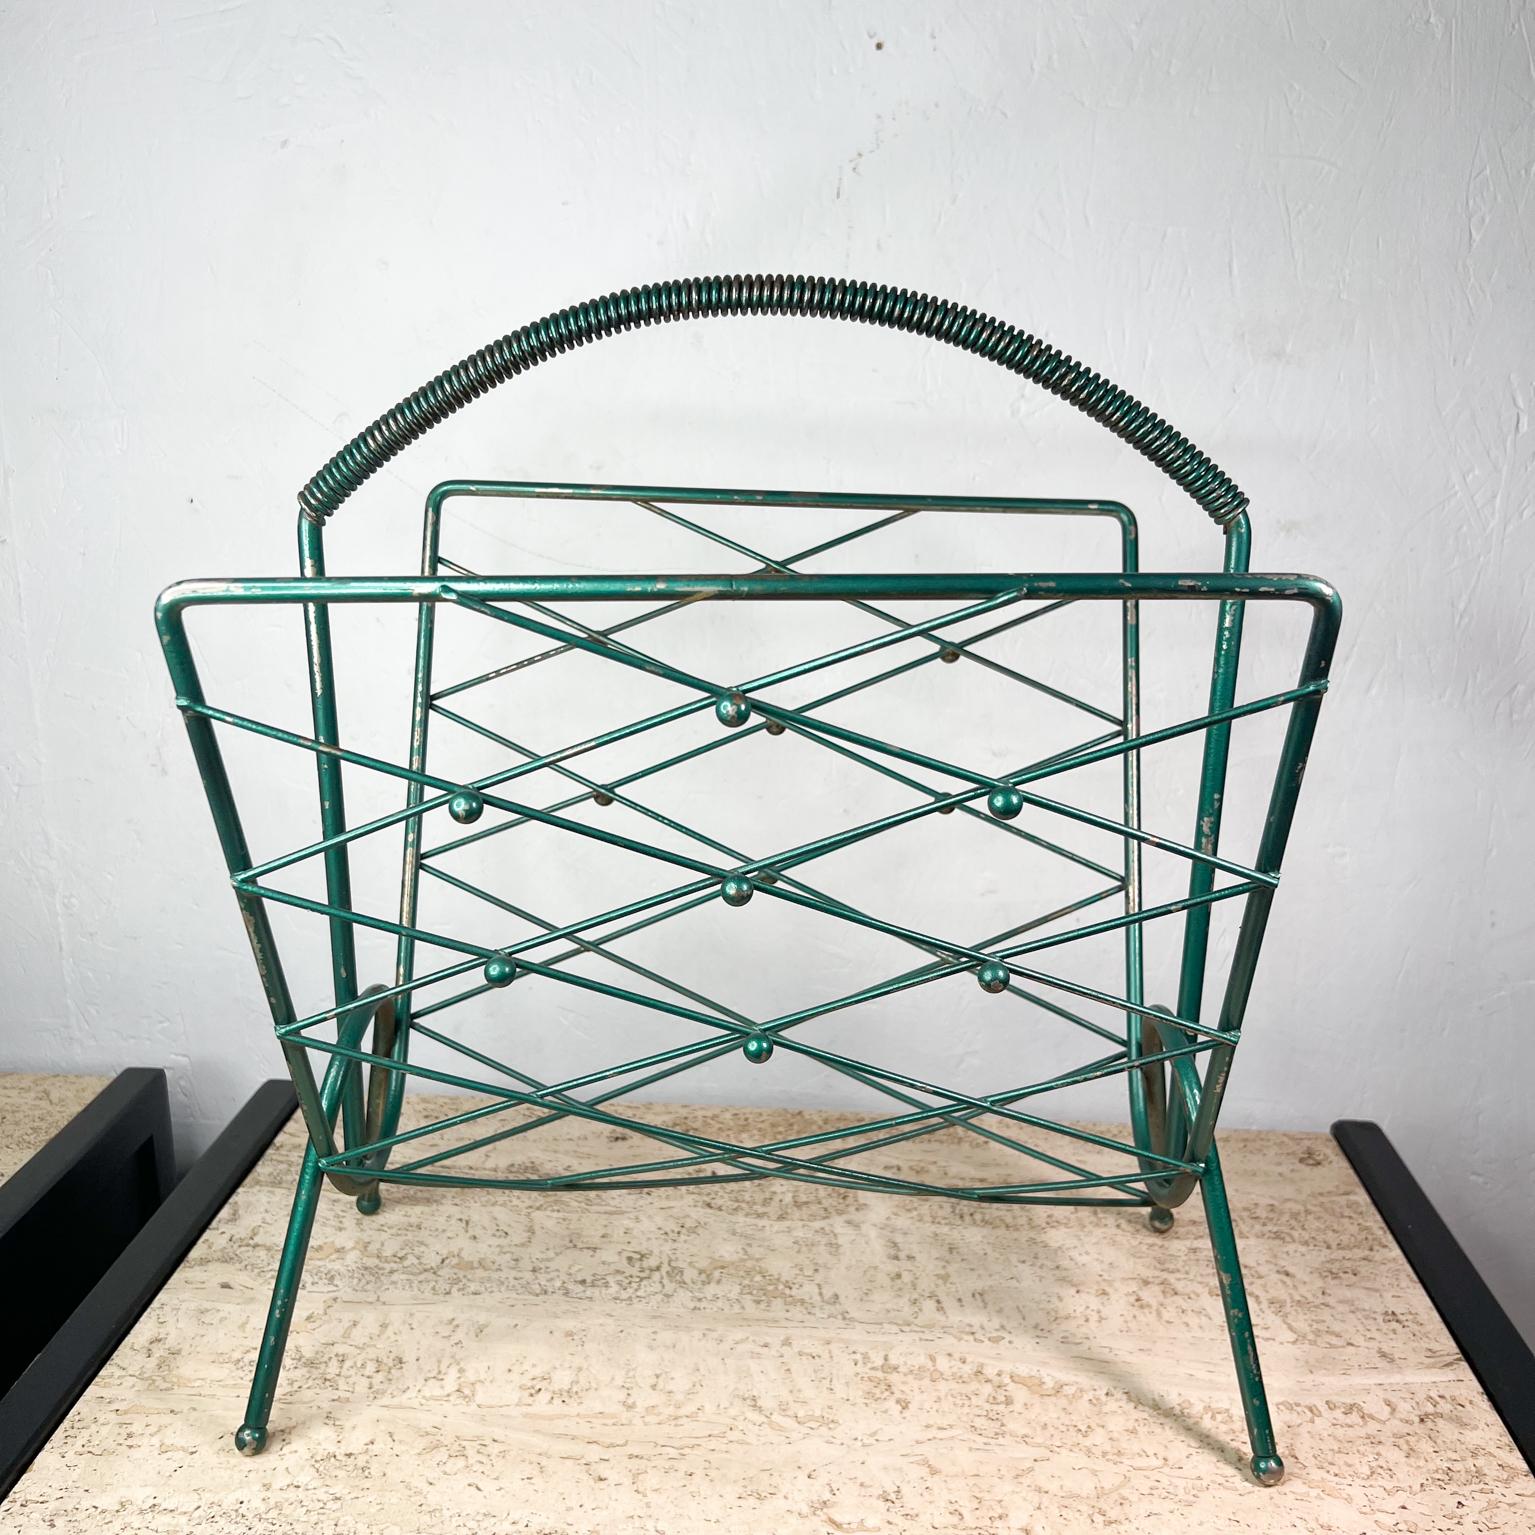 1950s French Vintage Magazine record rack in green metallic 
18 h x 14.75 w x 13.25 d
No markings present. 
Vintage unrestored condition with nicks on the original finish. 
Refer to images.

